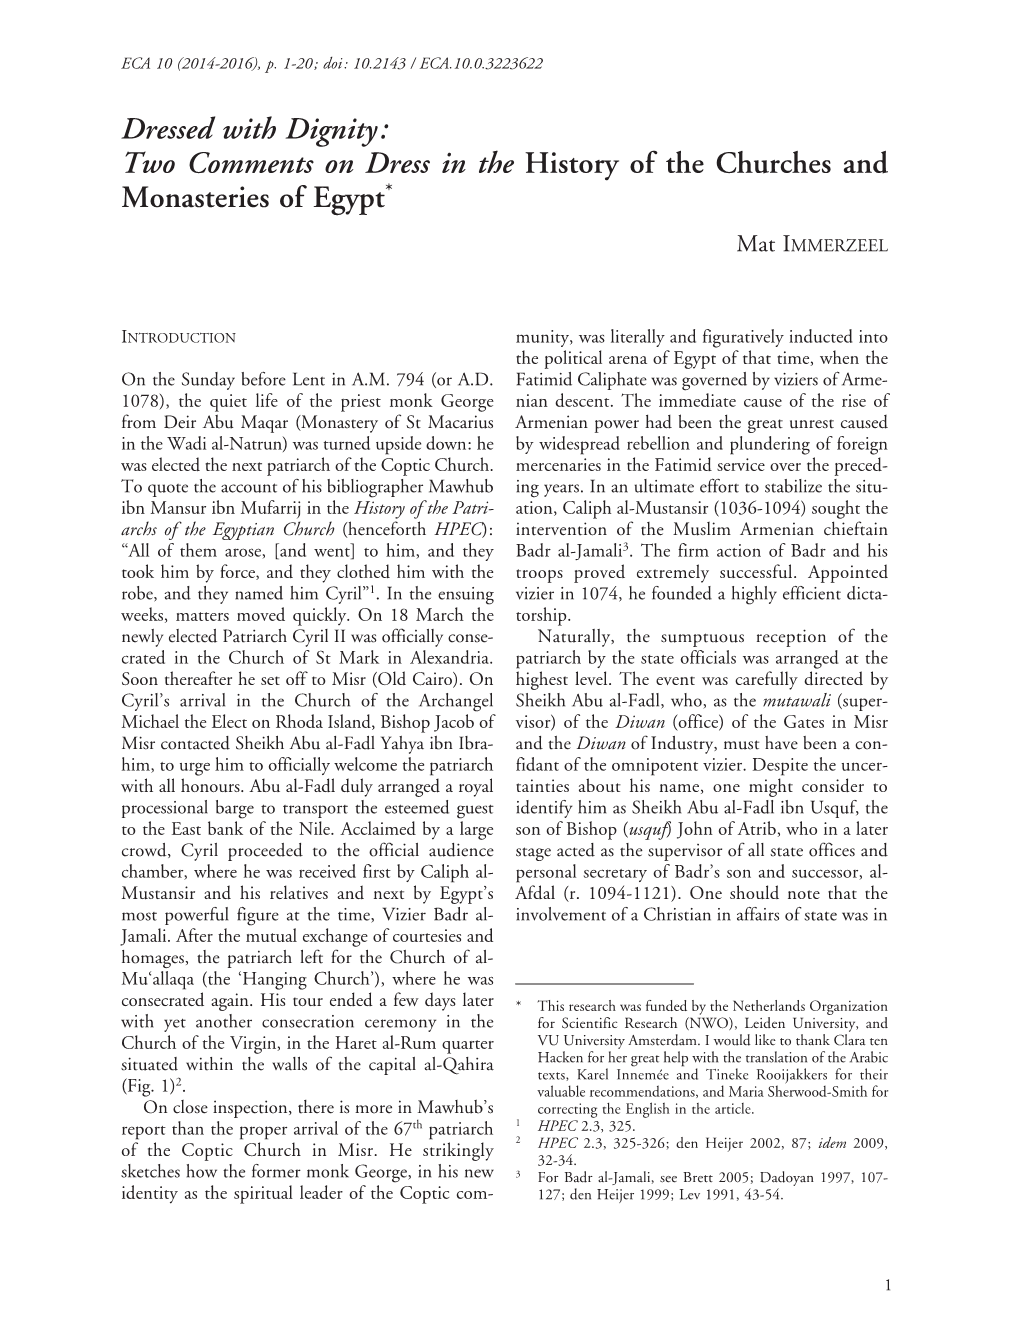 Two Comments on Dress in the History of the Churches and Monasteries of Egypt* Mat IMMERZEEL